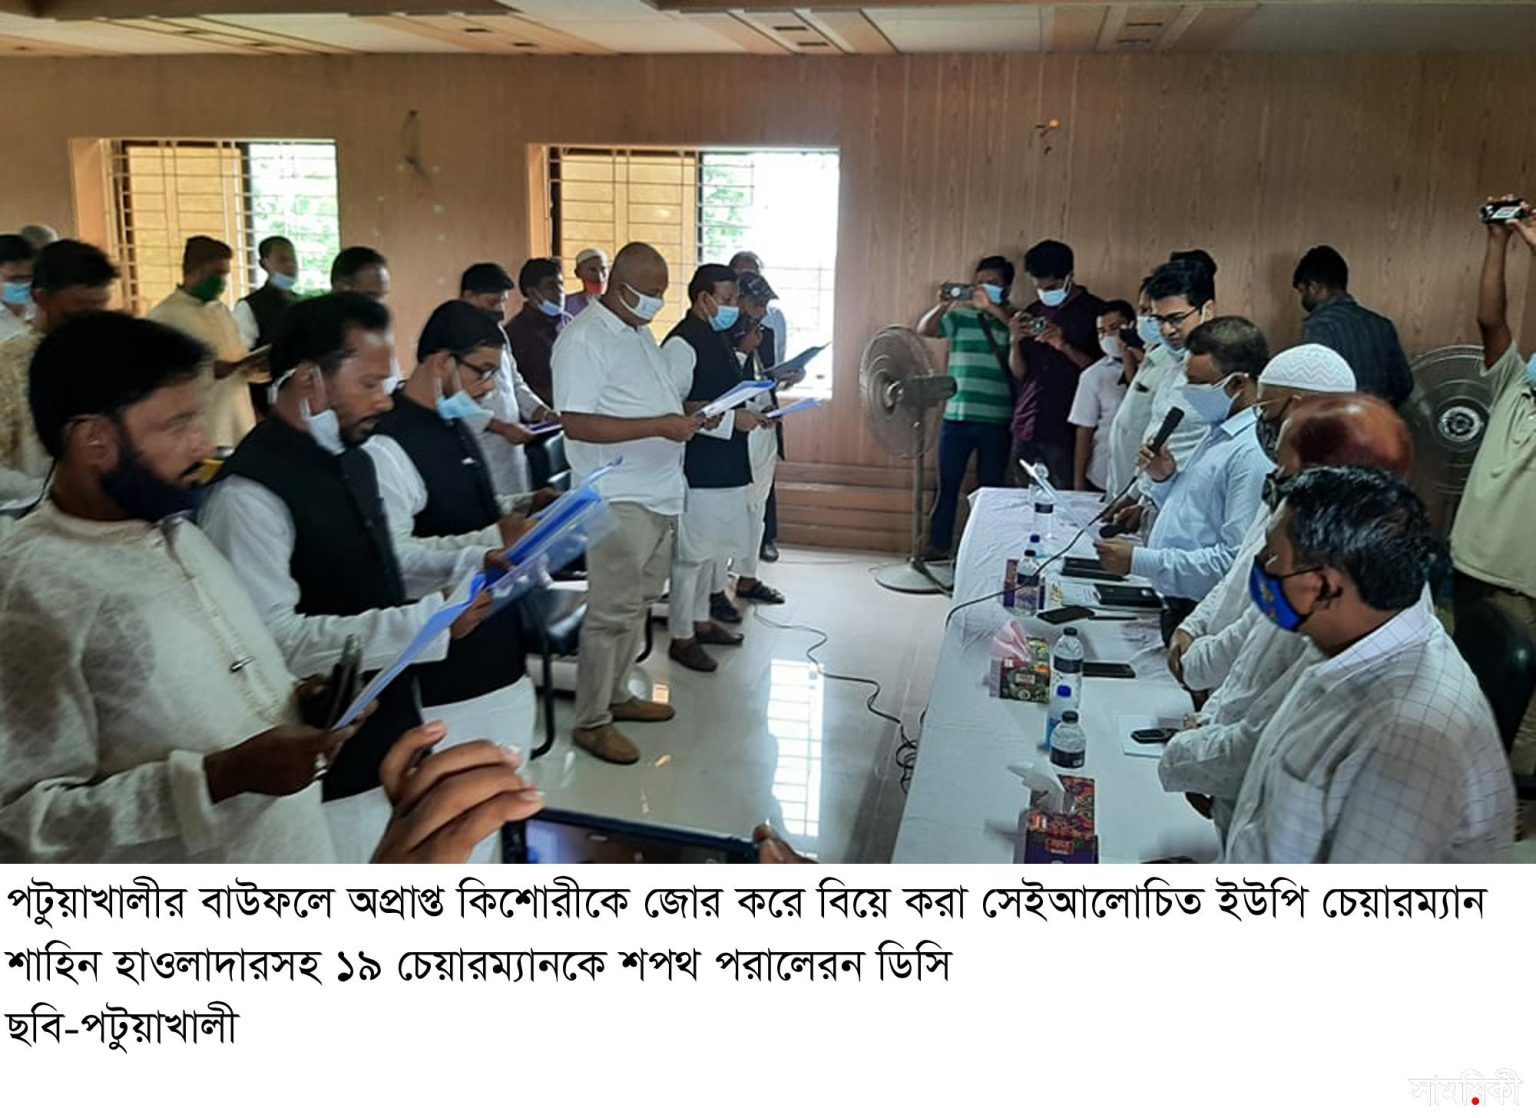 Patuakhali Photo Newly elected nineteen UP chairman including the who became deleberated after marrying girl came for arbitration taken oath in Patuakhali district 1 পটুয়াখালীতে কিশোরীকে বিয়ে করা সেই চেয়ারম্যান সহ ১৯ জন শপথ পড়েছেন